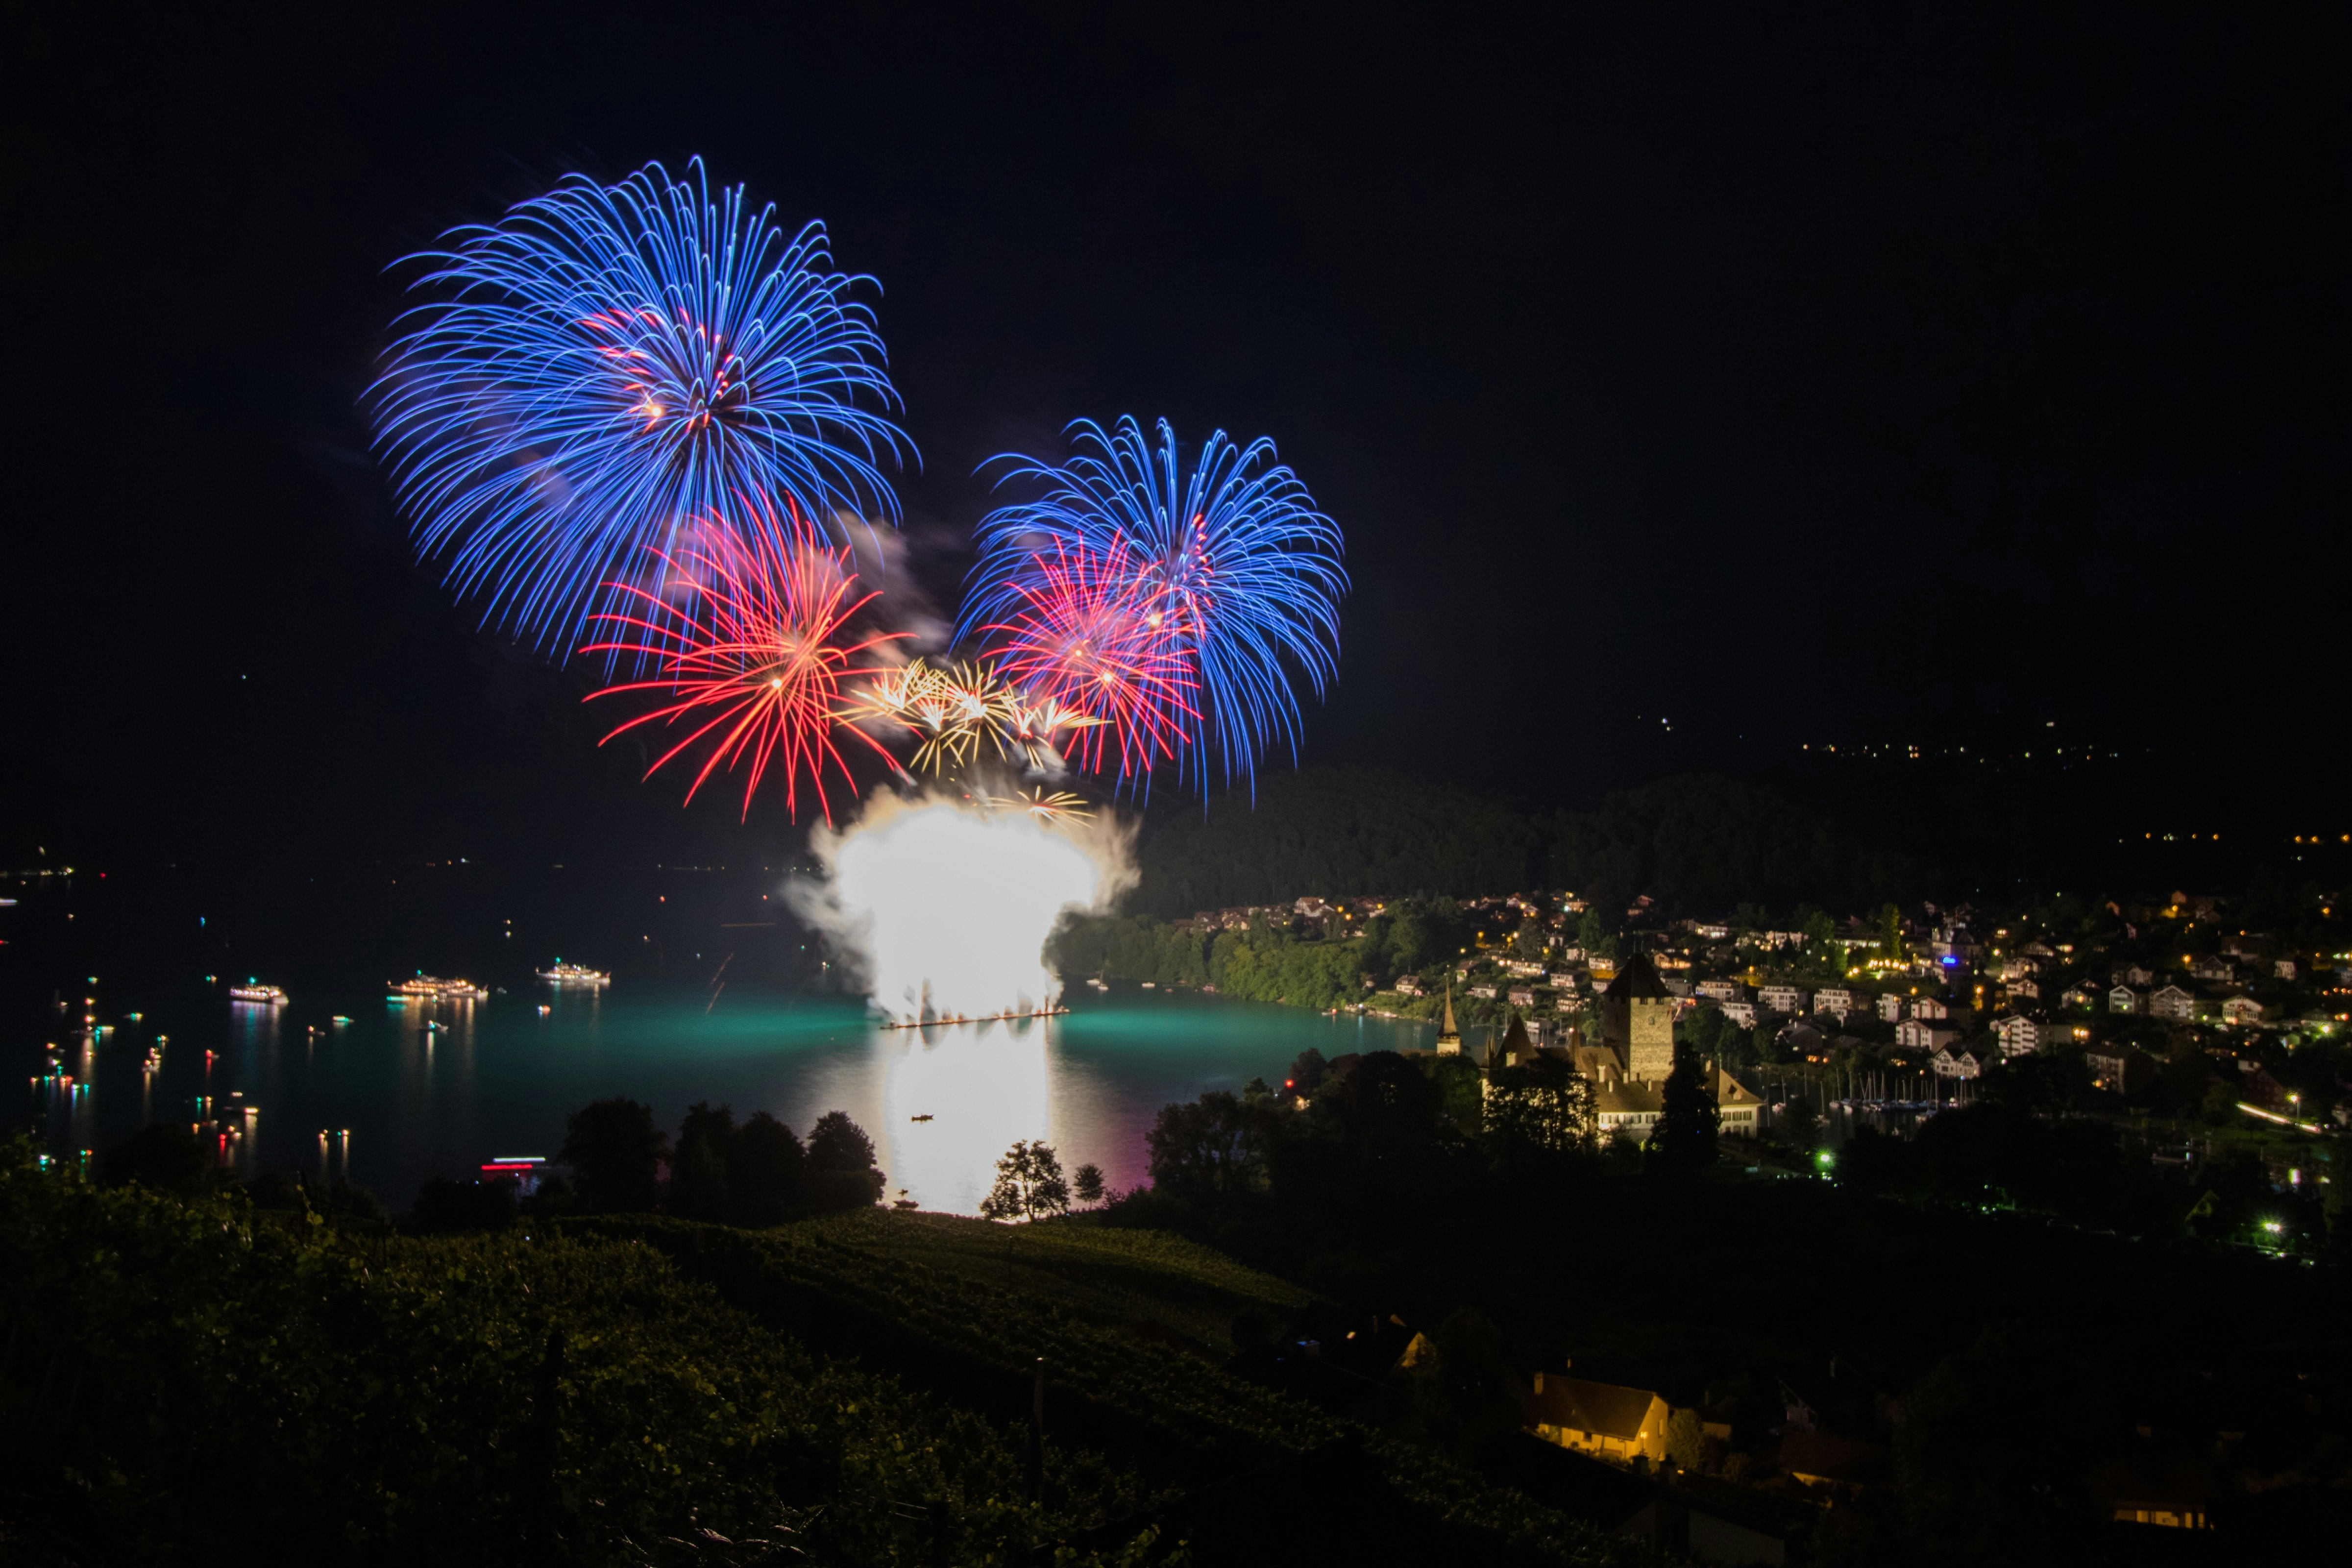 A boat in the middle of a blue lake fires colourful fireworks into the night sky. On the surrounding shores a number of houses are visible amongst greenery.